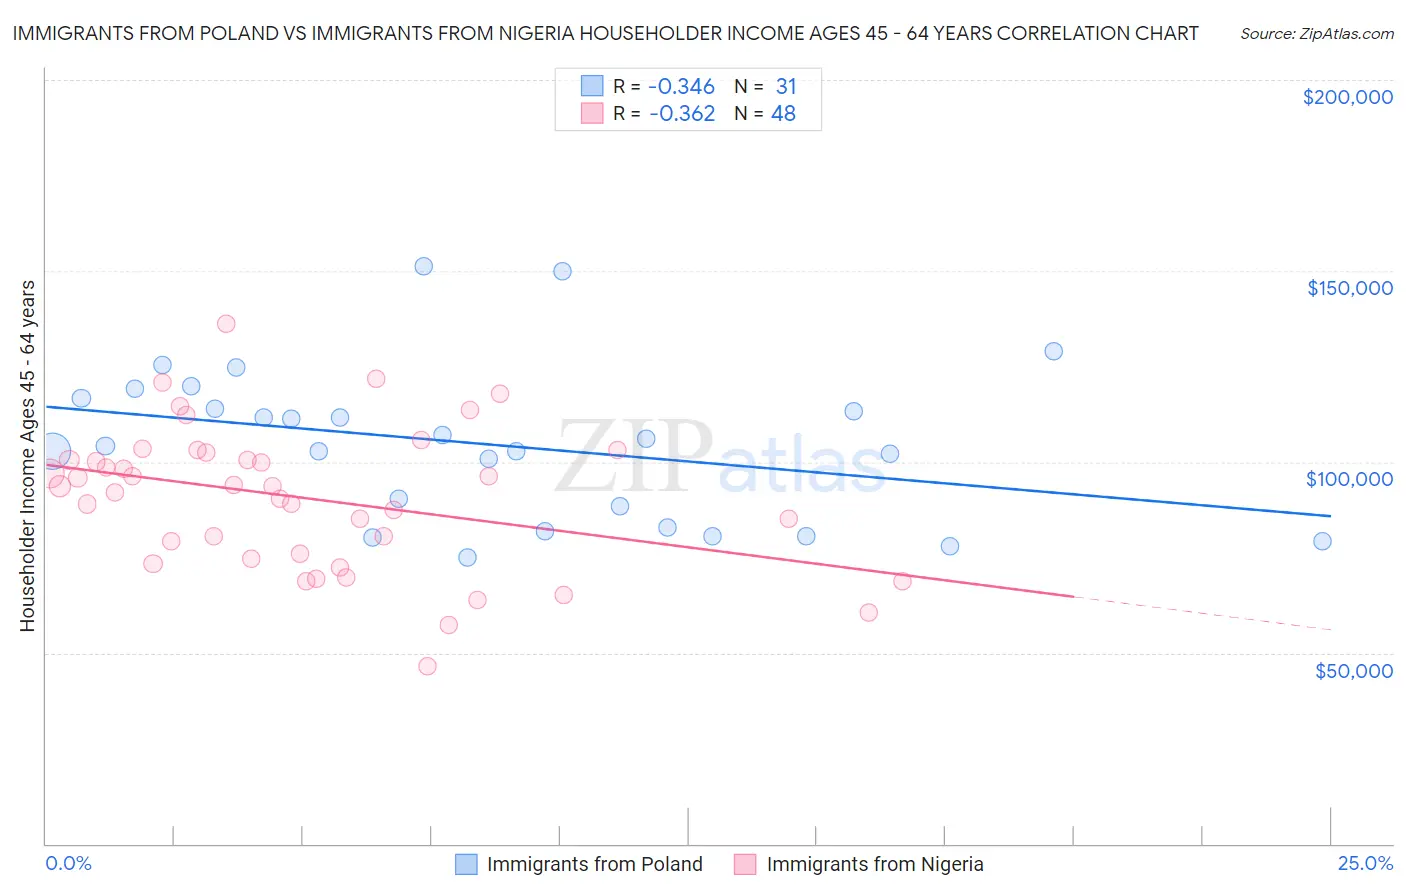 Immigrants from Poland vs Immigrants from Nigeria Householder Income Ages 45 - 64 years